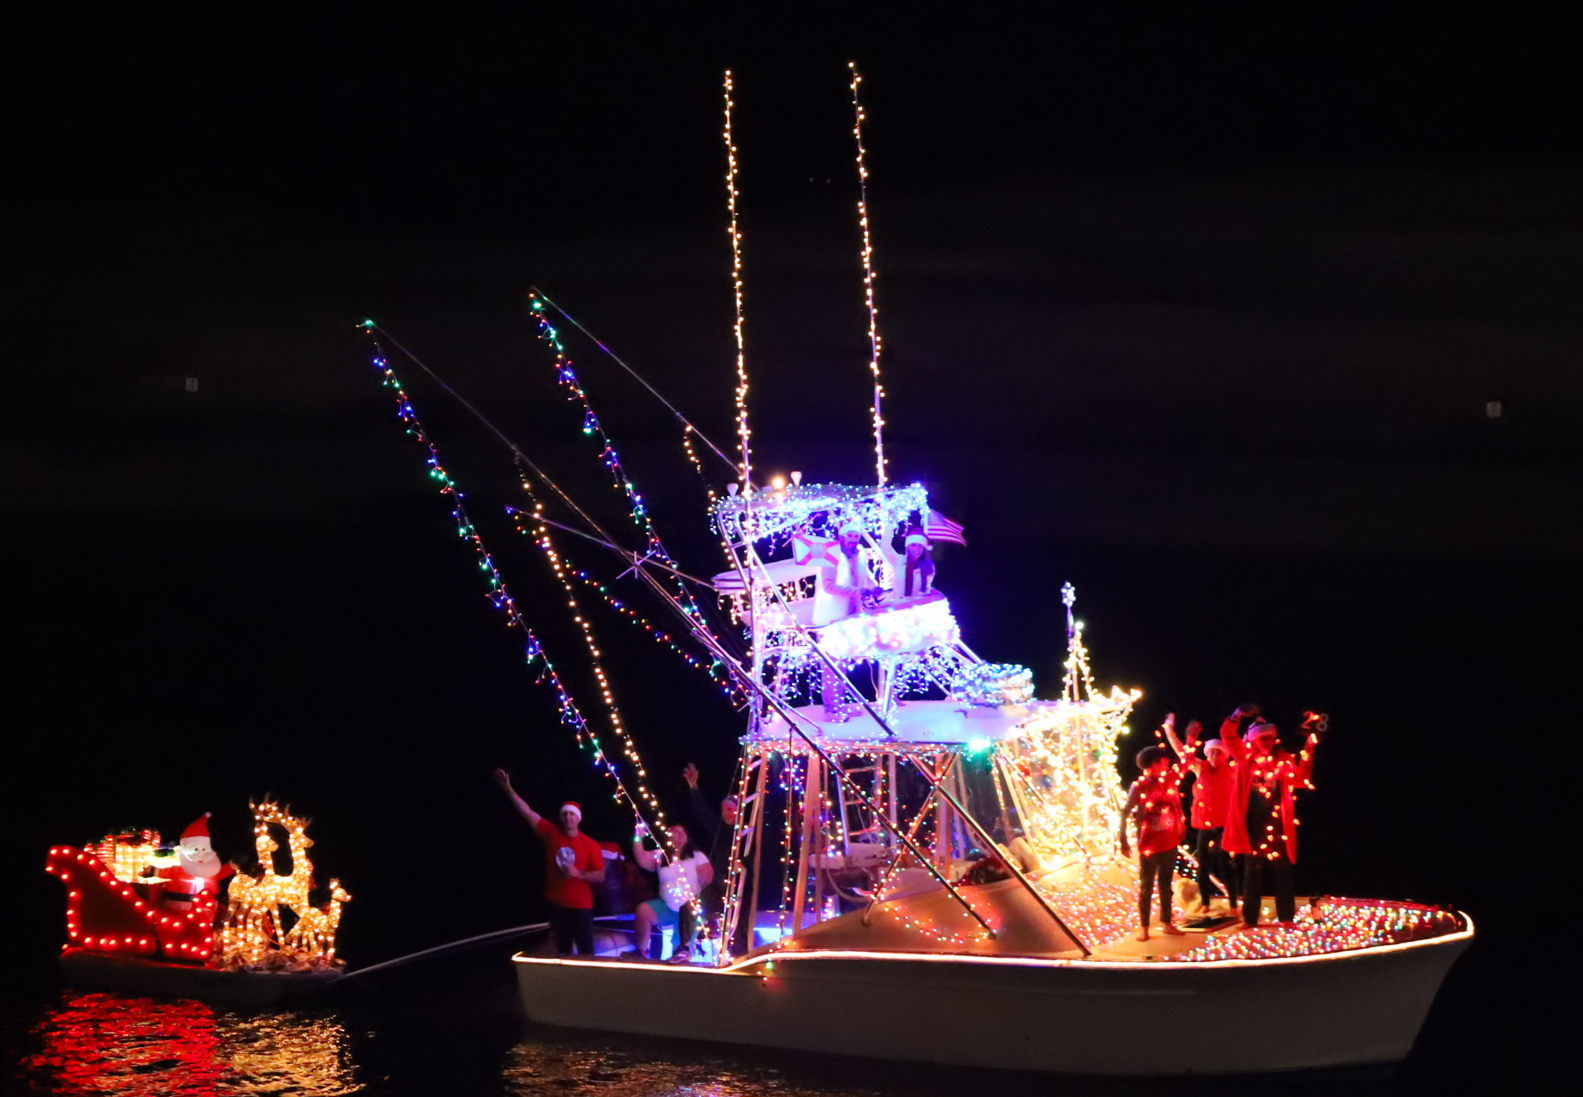 Santa's sled being pulled by the Wassiya - private boat in the Destin boat parade